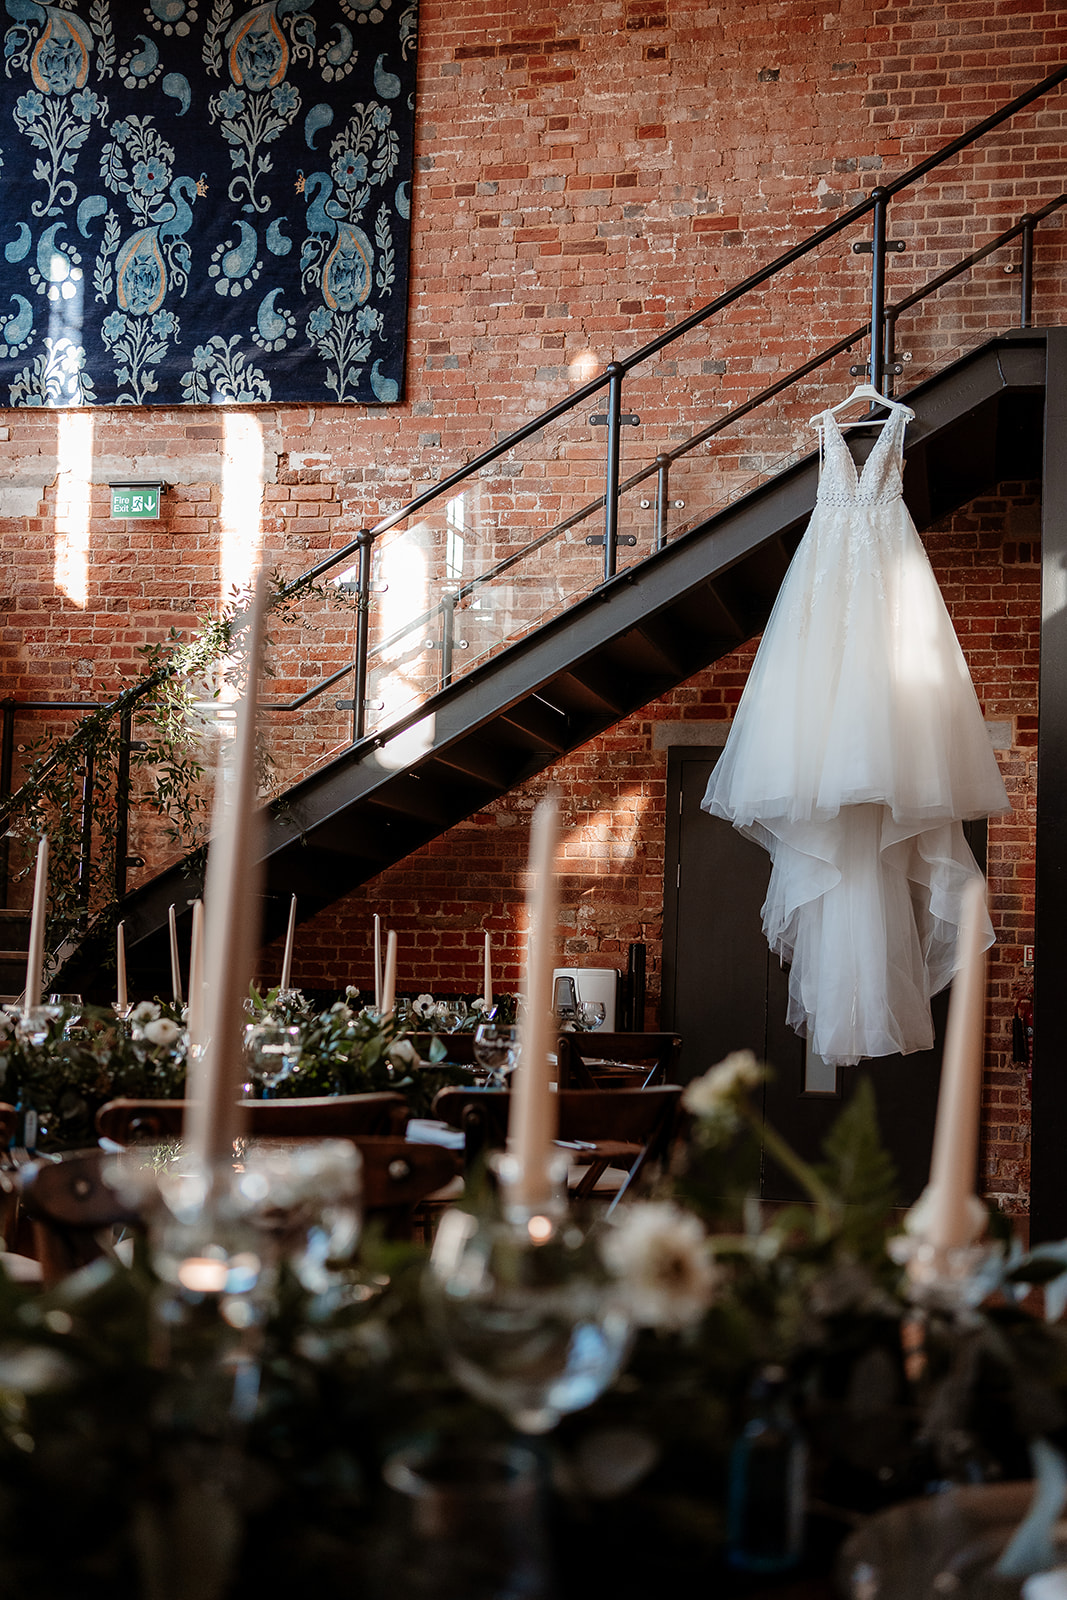 A white bridal ballgown hangs from a staircase with tables laid for a wedding breakfast in the foreground. 